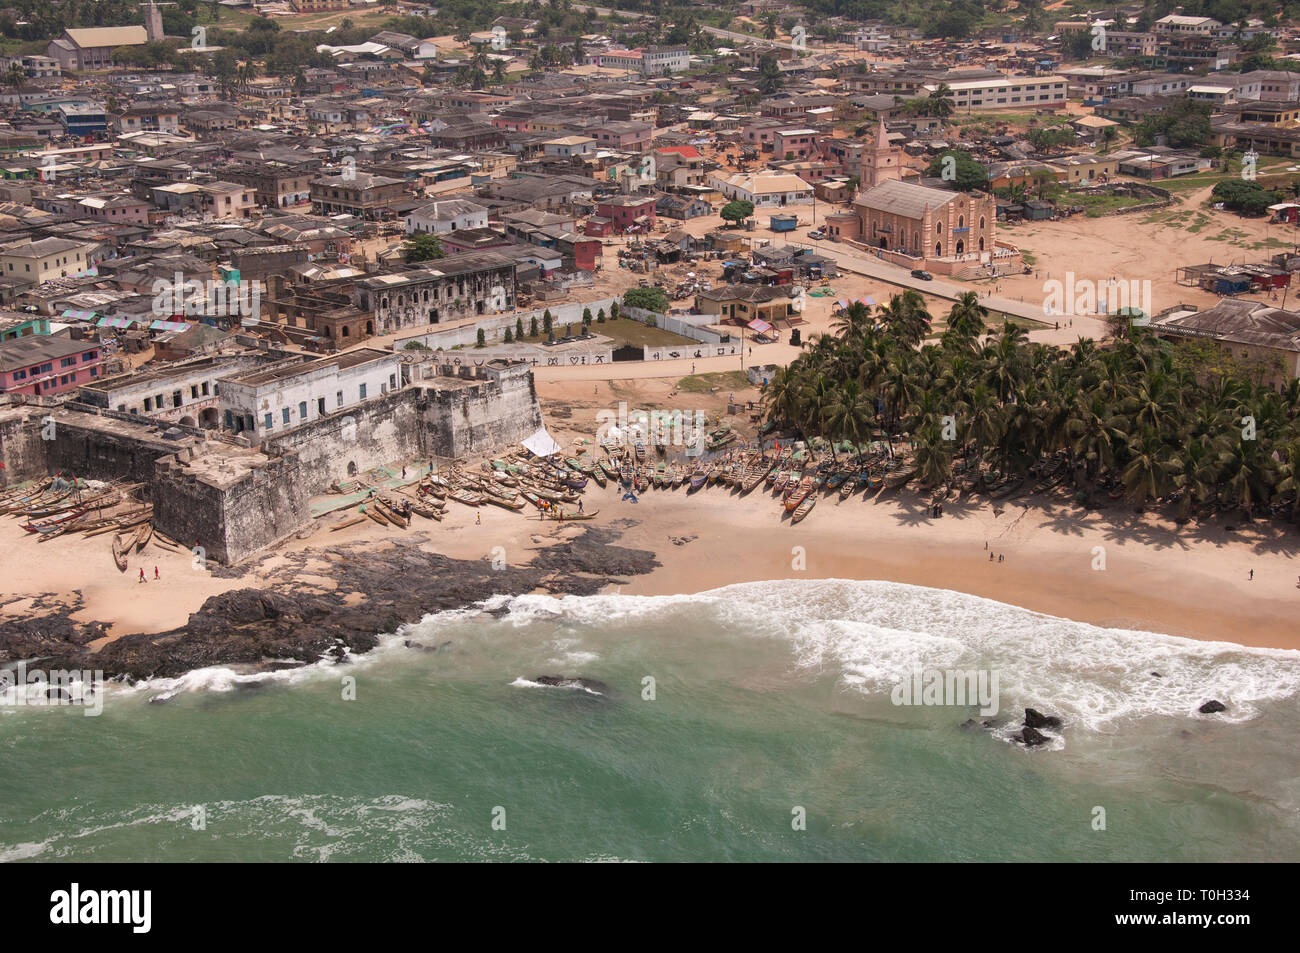 West of the city of Accra the Ghanaian coast is alive with fishing boats and people bustling around a 15th century fort. Stock Photo